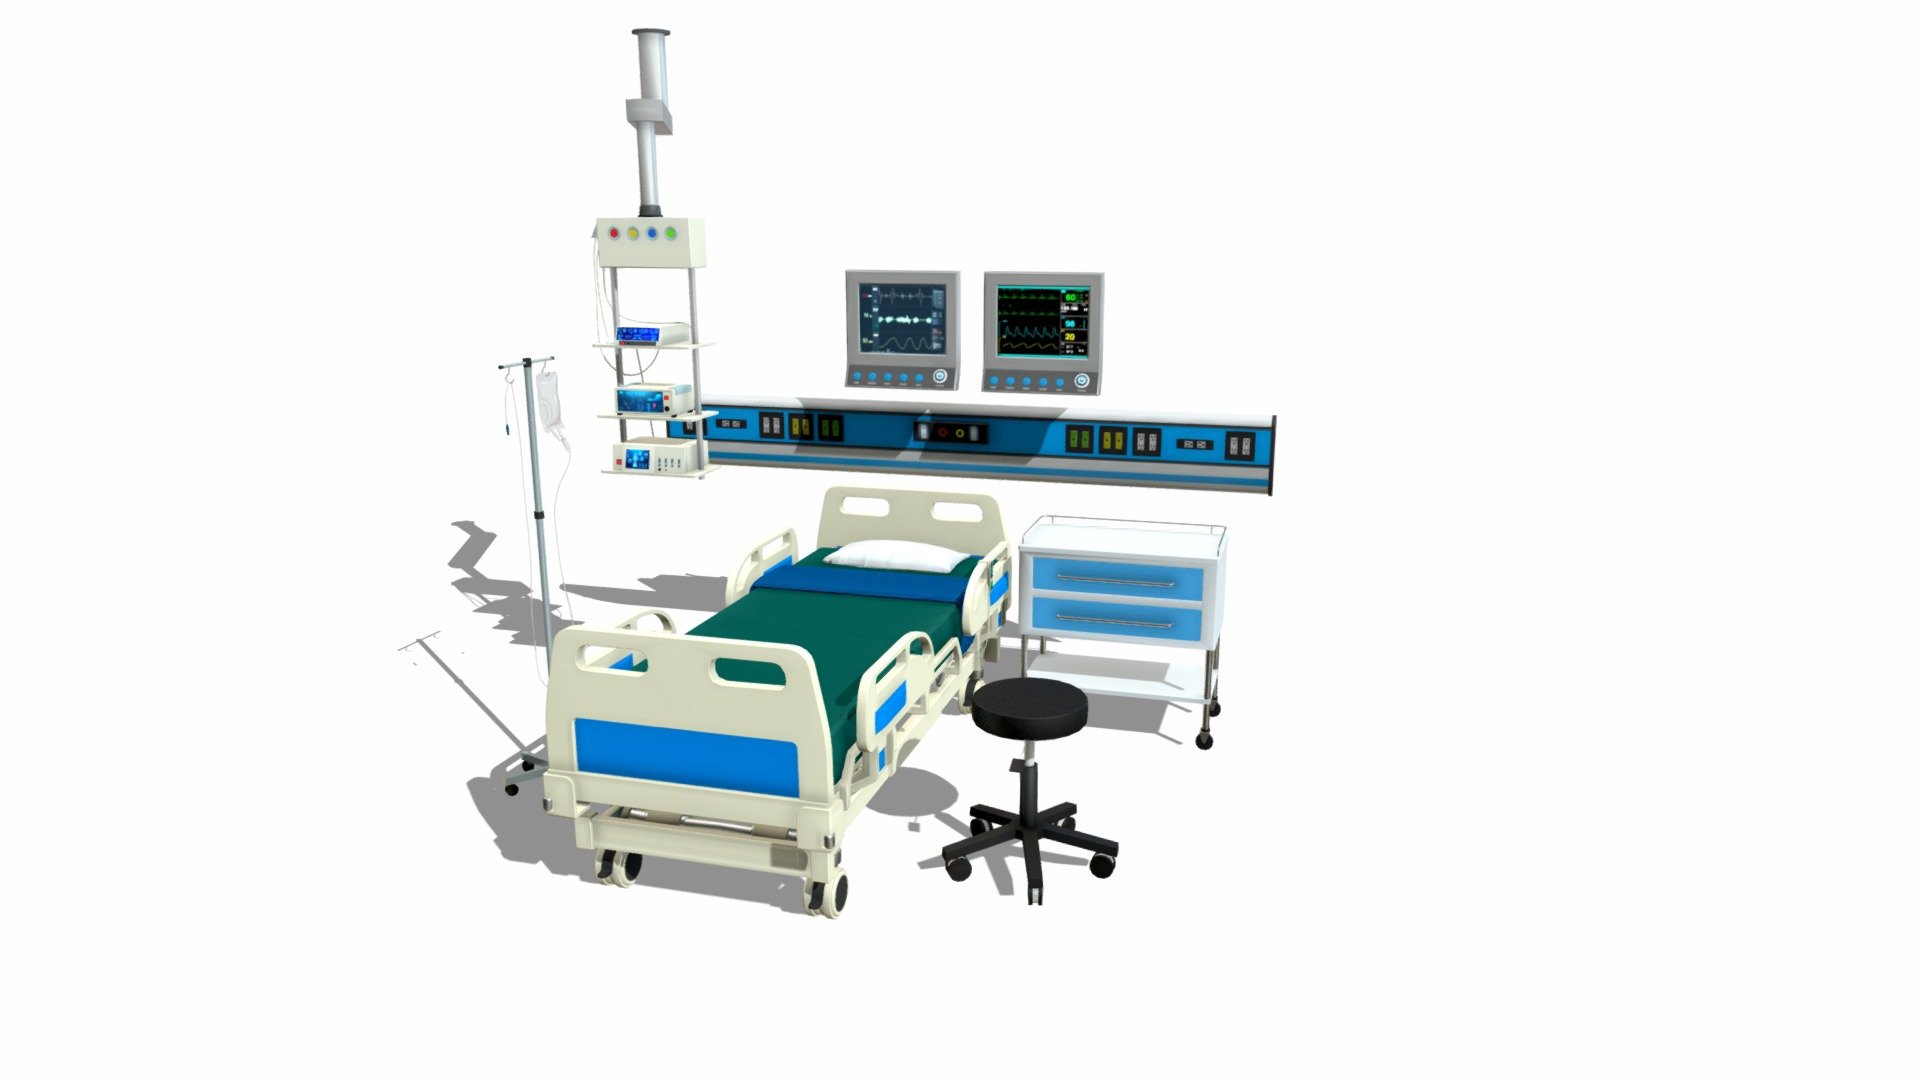 A detailed set of ICU equipment models, which includes a Trolly Table, Modutec Power Maquet, ECG Machine, a medical bed, and an IV stand. 

All of the models are fully unwrapped and feature clean geometry, consisting mostly of quads with no N-gons, coplanar faces, or coincident or isolated vertices. 

Additionally, the textures are high quality with a size of 2048x2048 pixels, and PBR textures are available for both specular/gloss and metallic workflows. 

If you require the product in a different format, our support team is available to assist with a free conversion. 

Lastly, the model uses real-world scale, where 1 unit equals 1 cm 3d model